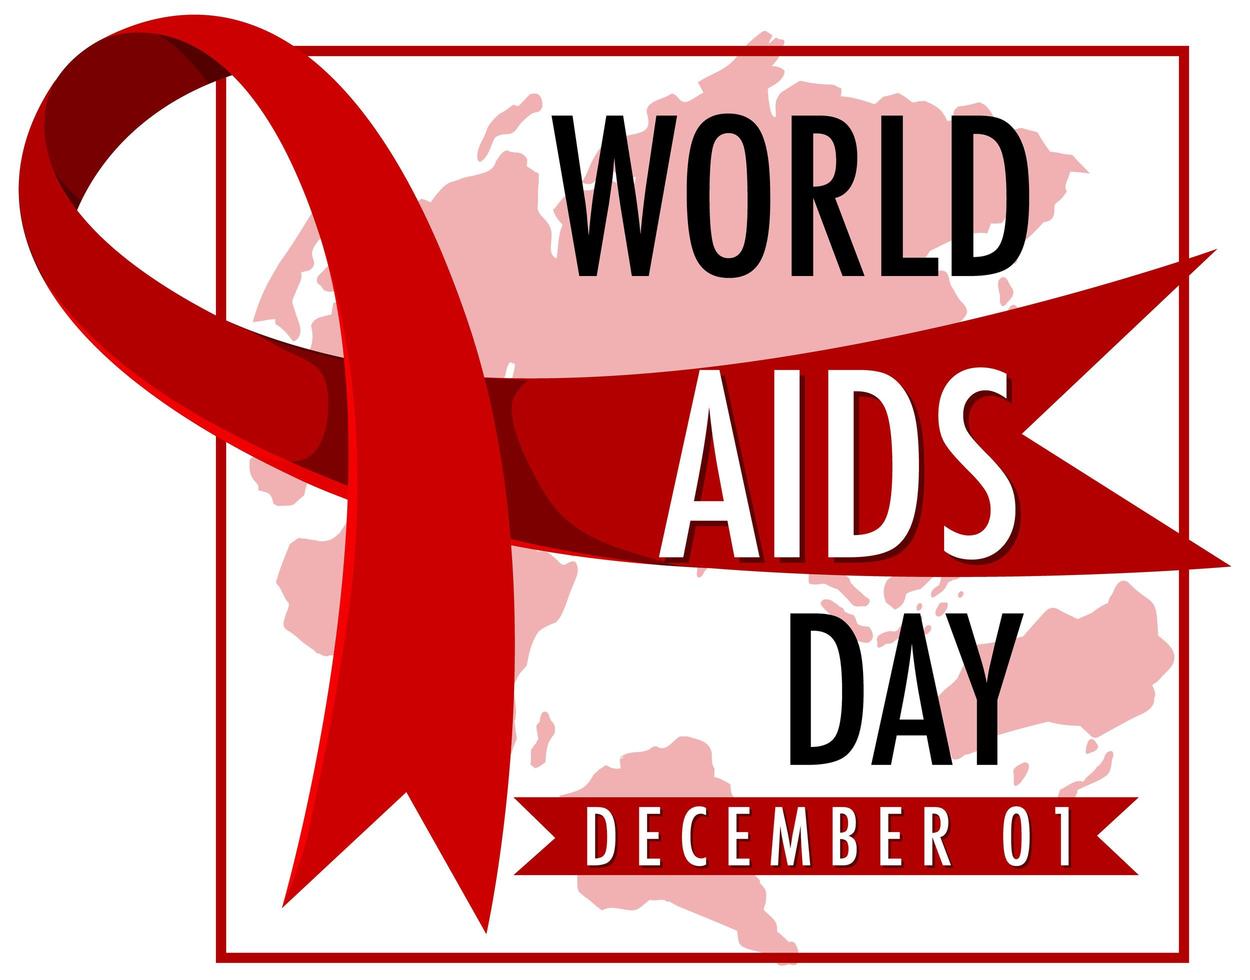 World AIDS Day banner with red ribbon on map vector